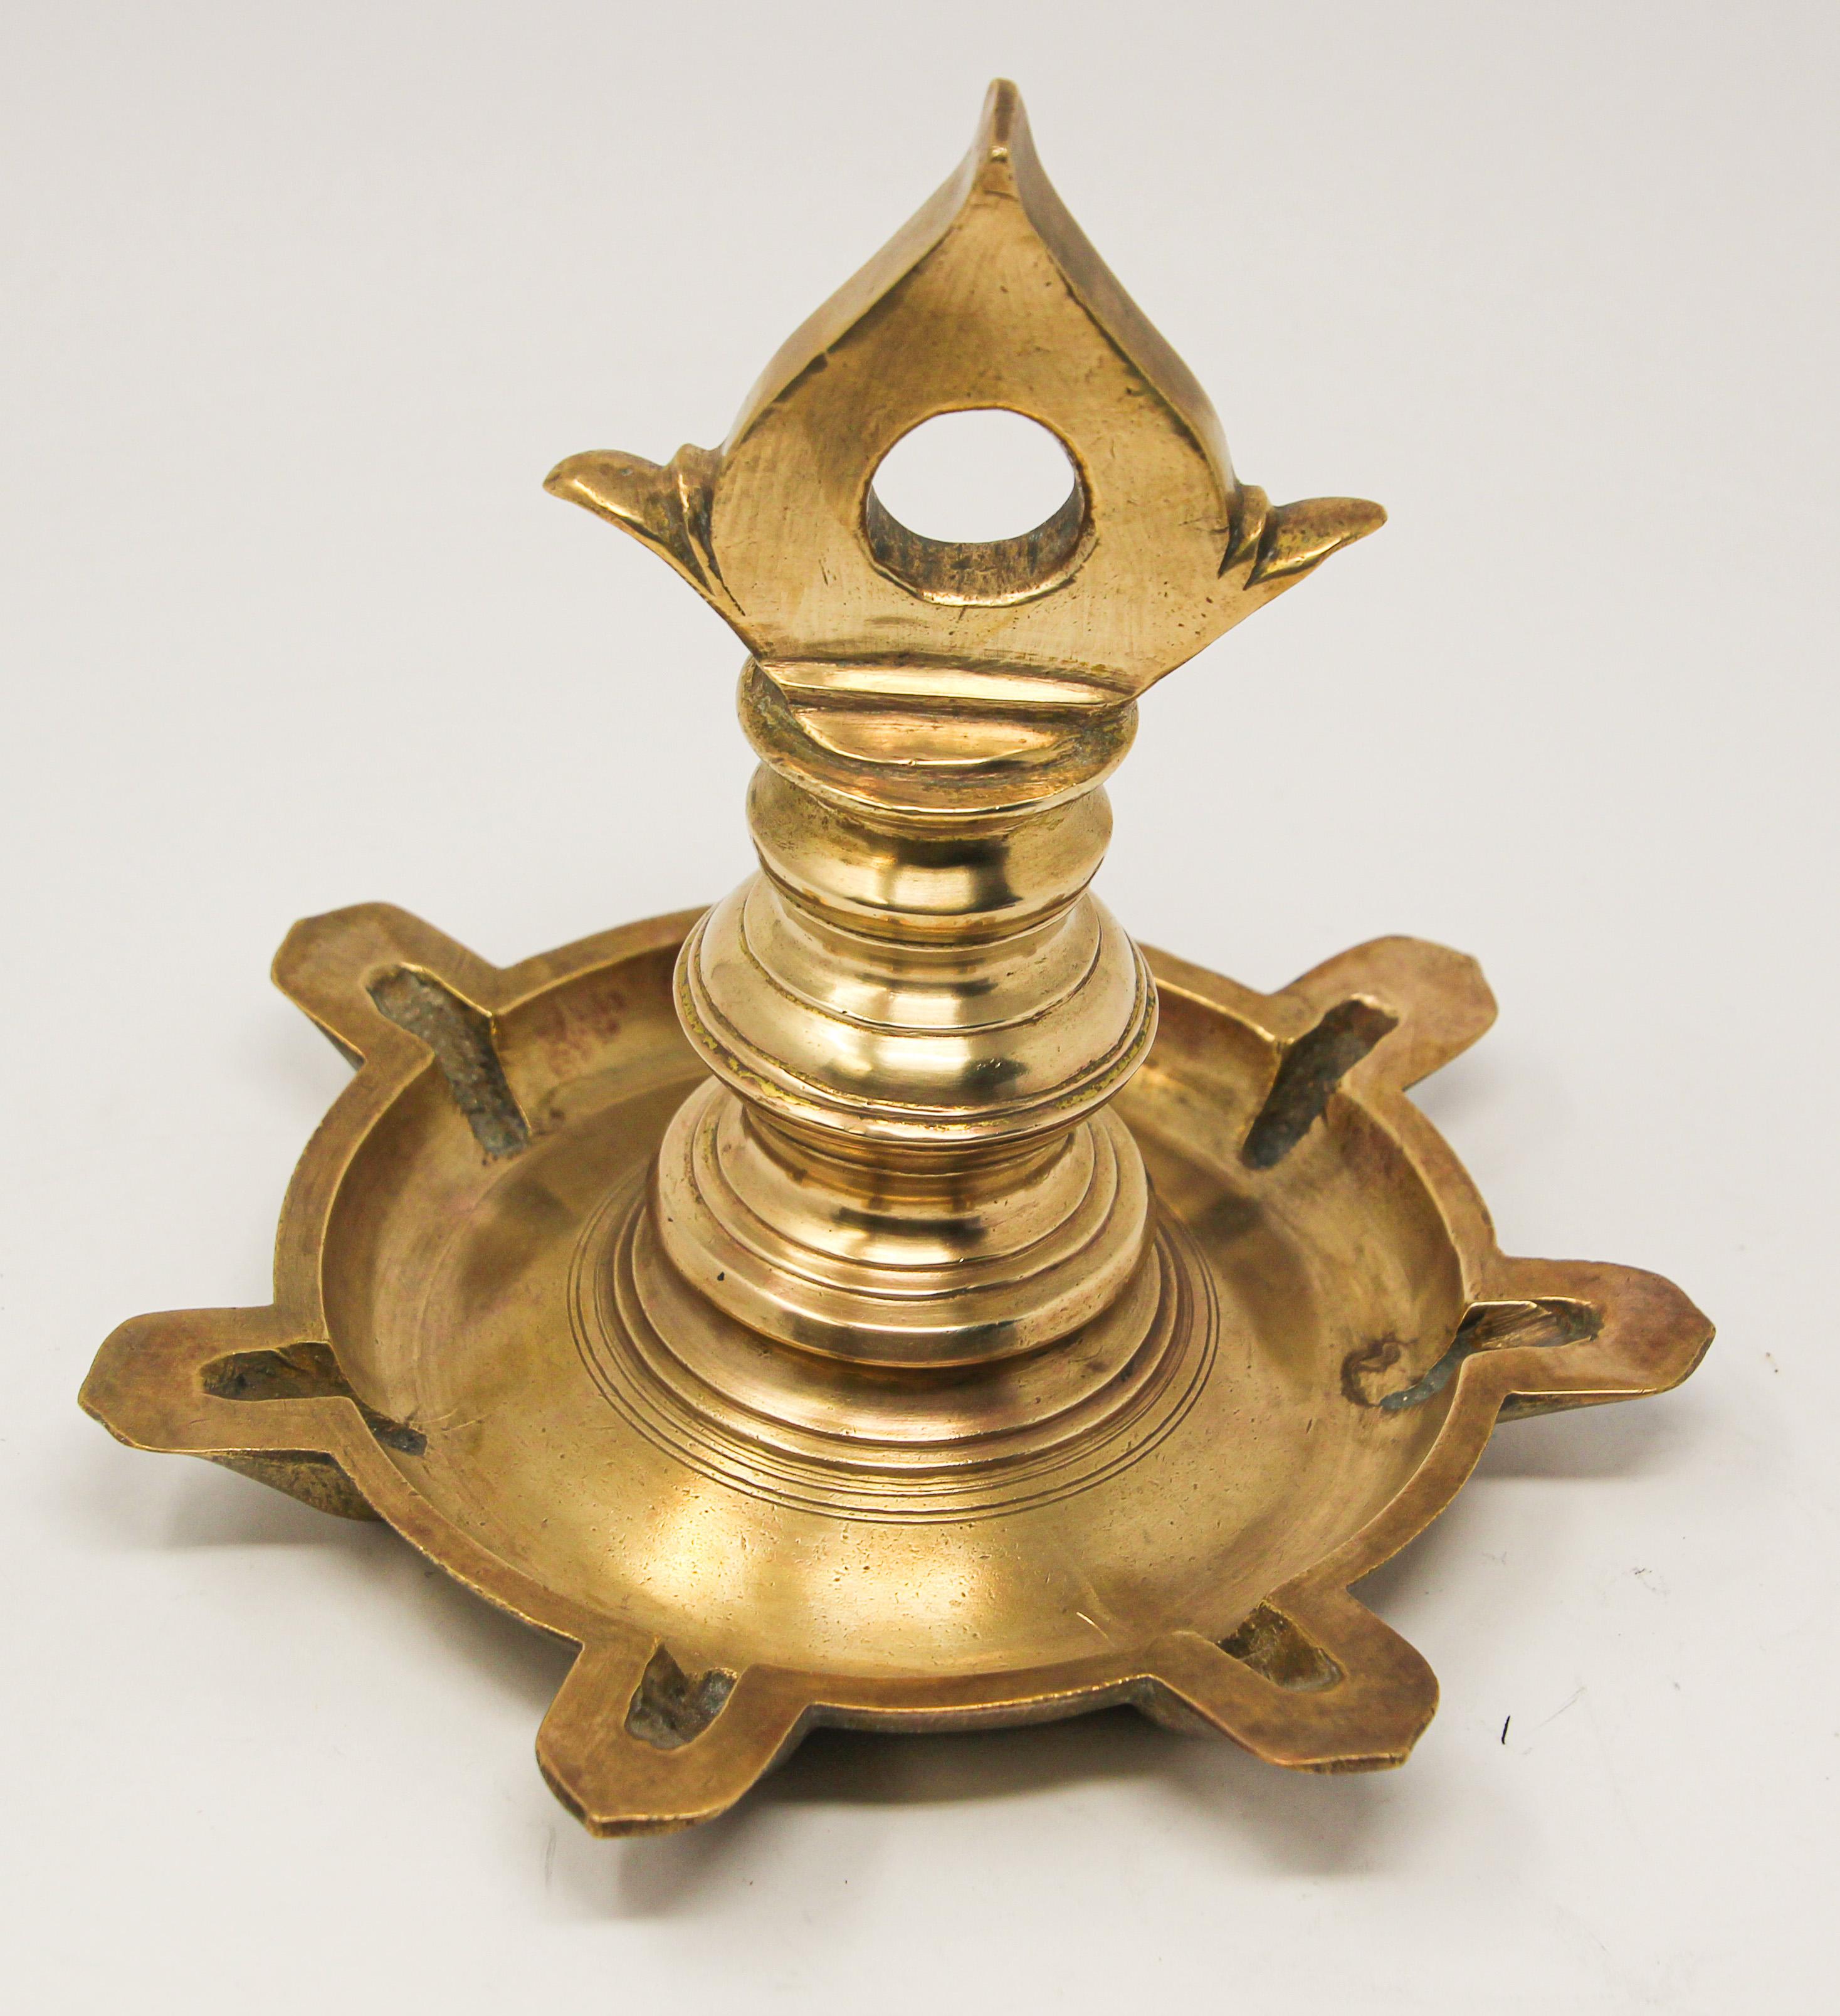 Traditional Religious cast brass Diya Temple oil lamp used for prayer.
Shallow dish with seven bati spouts.
A 